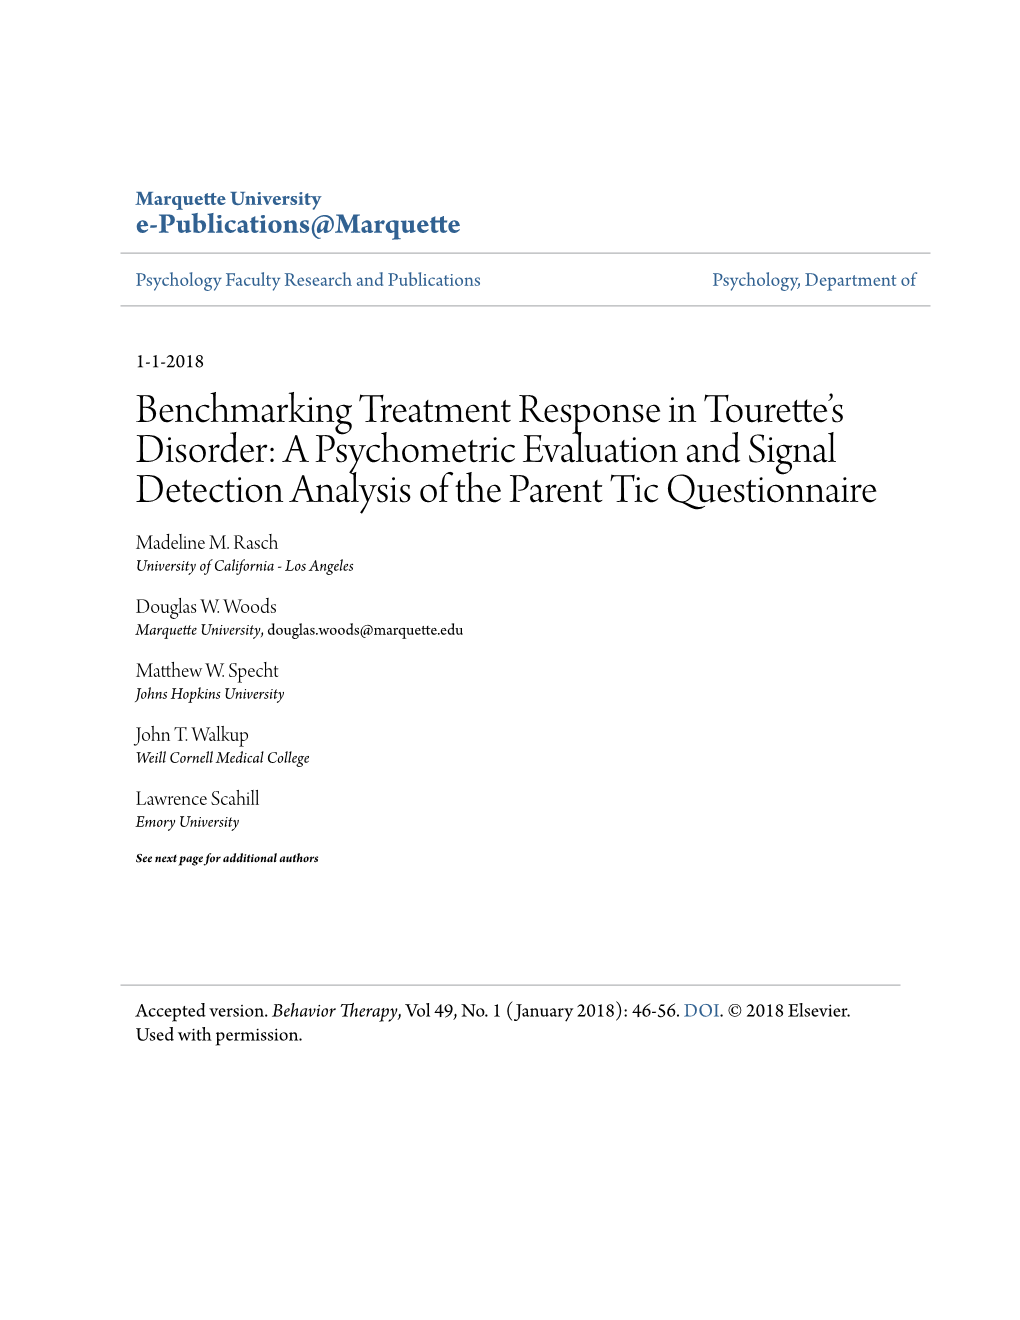 Benchmarking Treatment Response in Tourette's Disorder: A